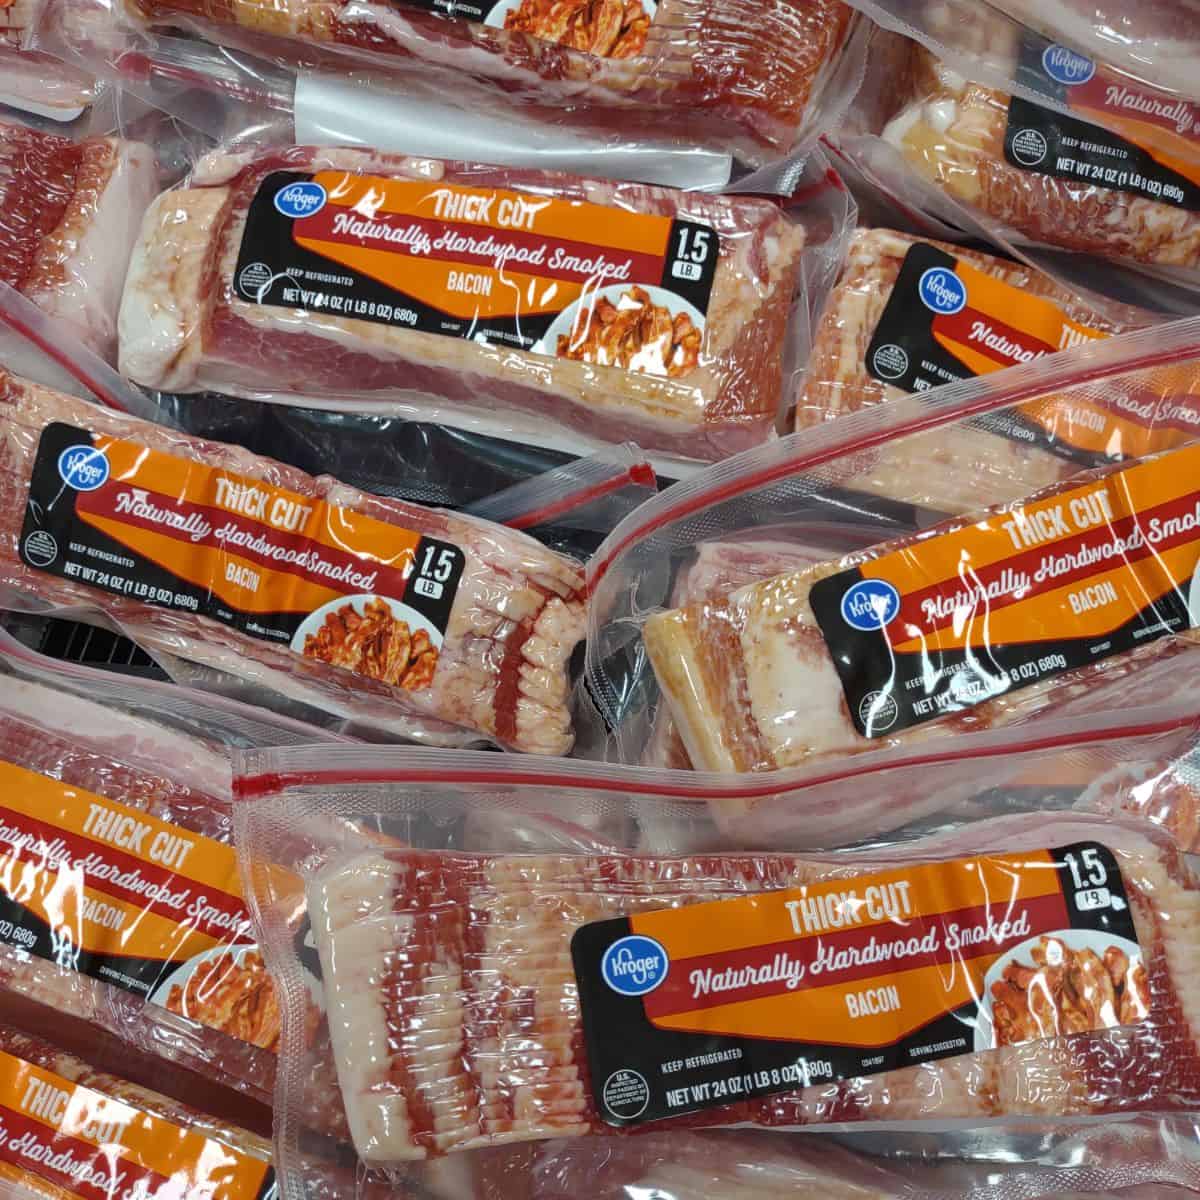 Packaged Thick Sliced Kroger Bacon at the store.